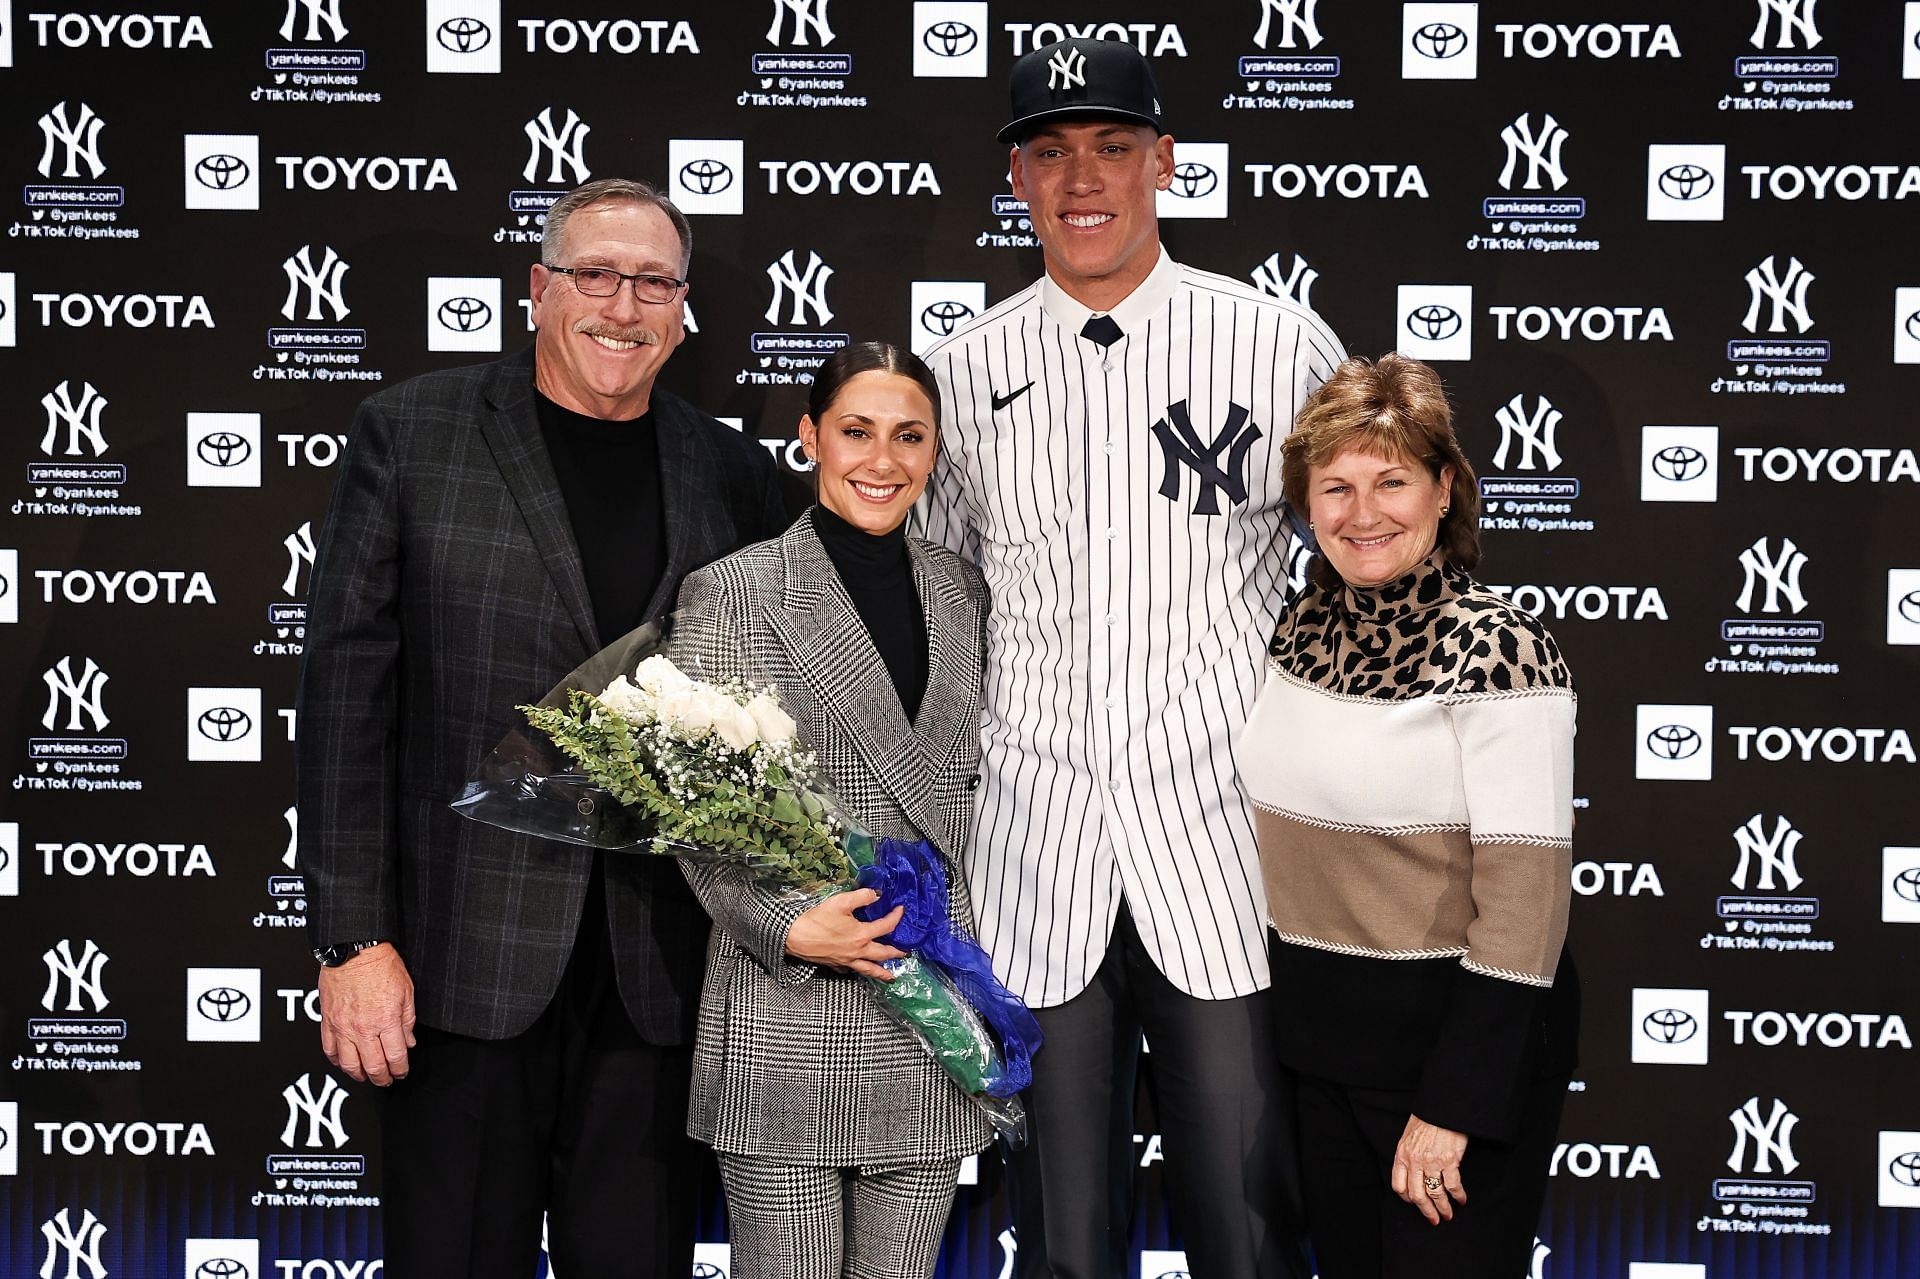 BRONX, NEW YORK - DECEMBER 21: Aaron Judge, #99 of the New York Yankees, poses for a photo with his wife, Samantha Judge, and parents, Patty Judge and Wayne Judge, after a press conference at Yankee Stadium on December 21, 2022, in Bronx, New York. (Photo by Dustin Satloff/Getty Images)